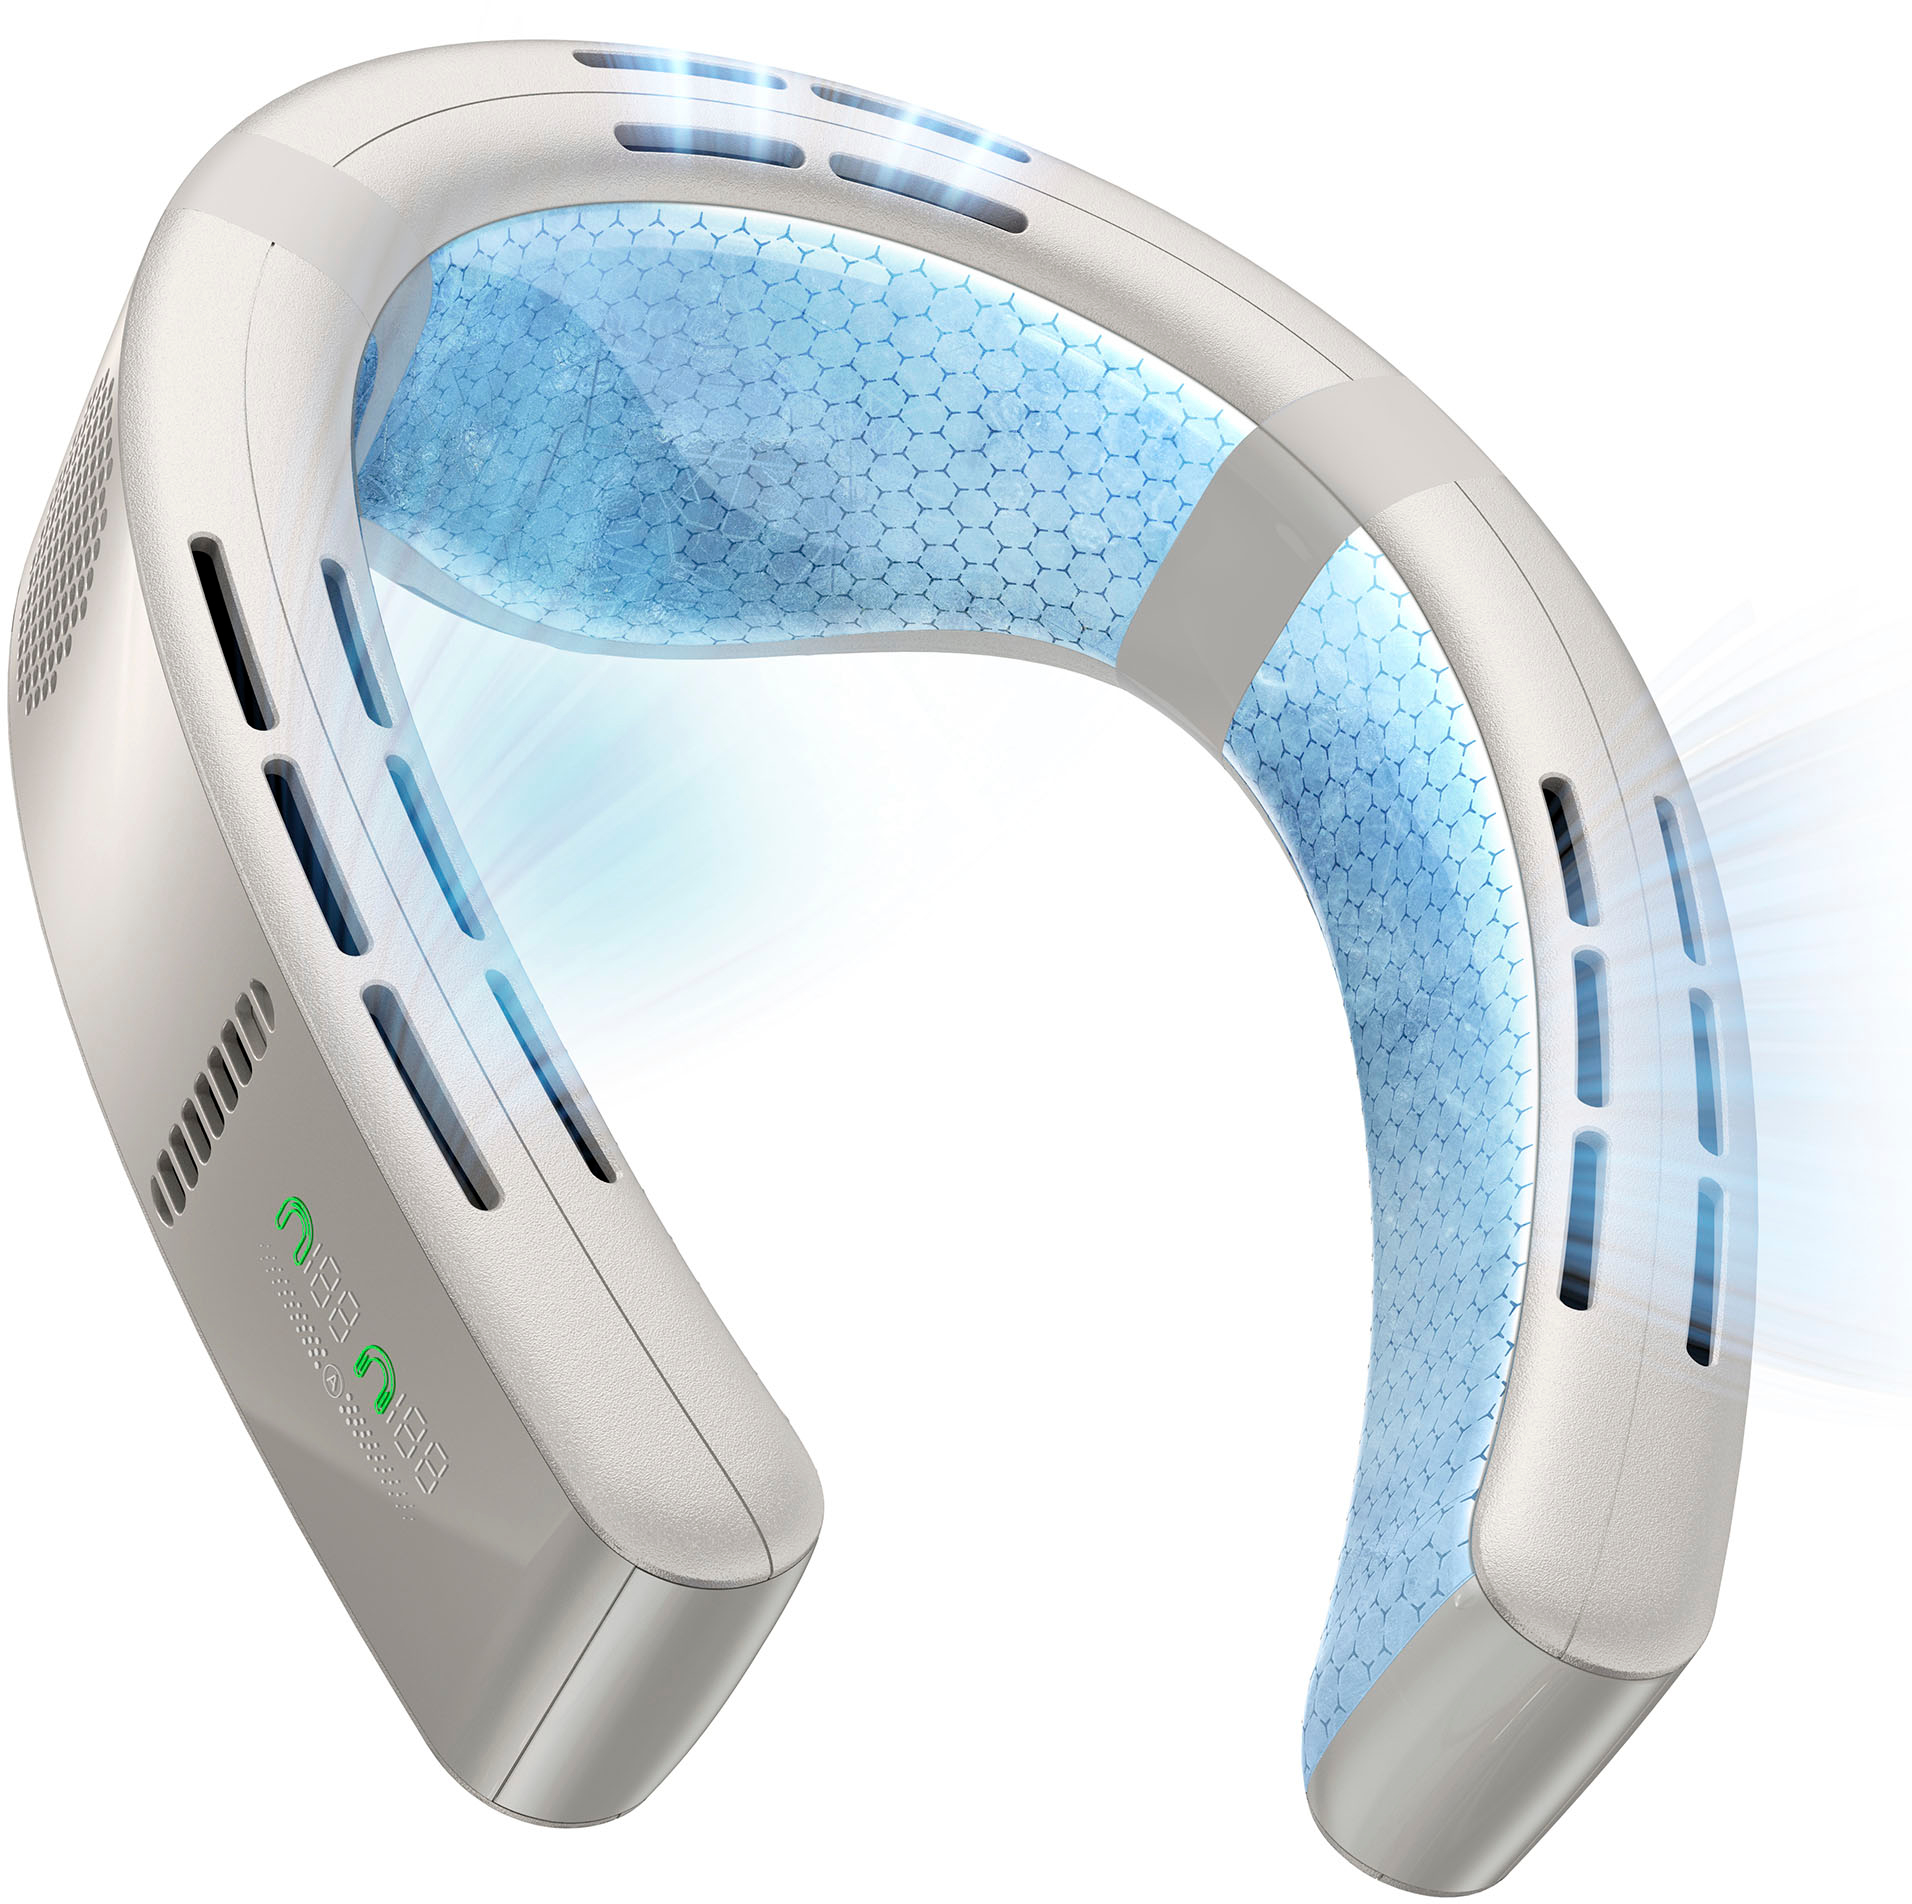 Angle View: TORRAS - COOLiFY Cyber Wearable Air Conditioner 6000mAh - Glacial White